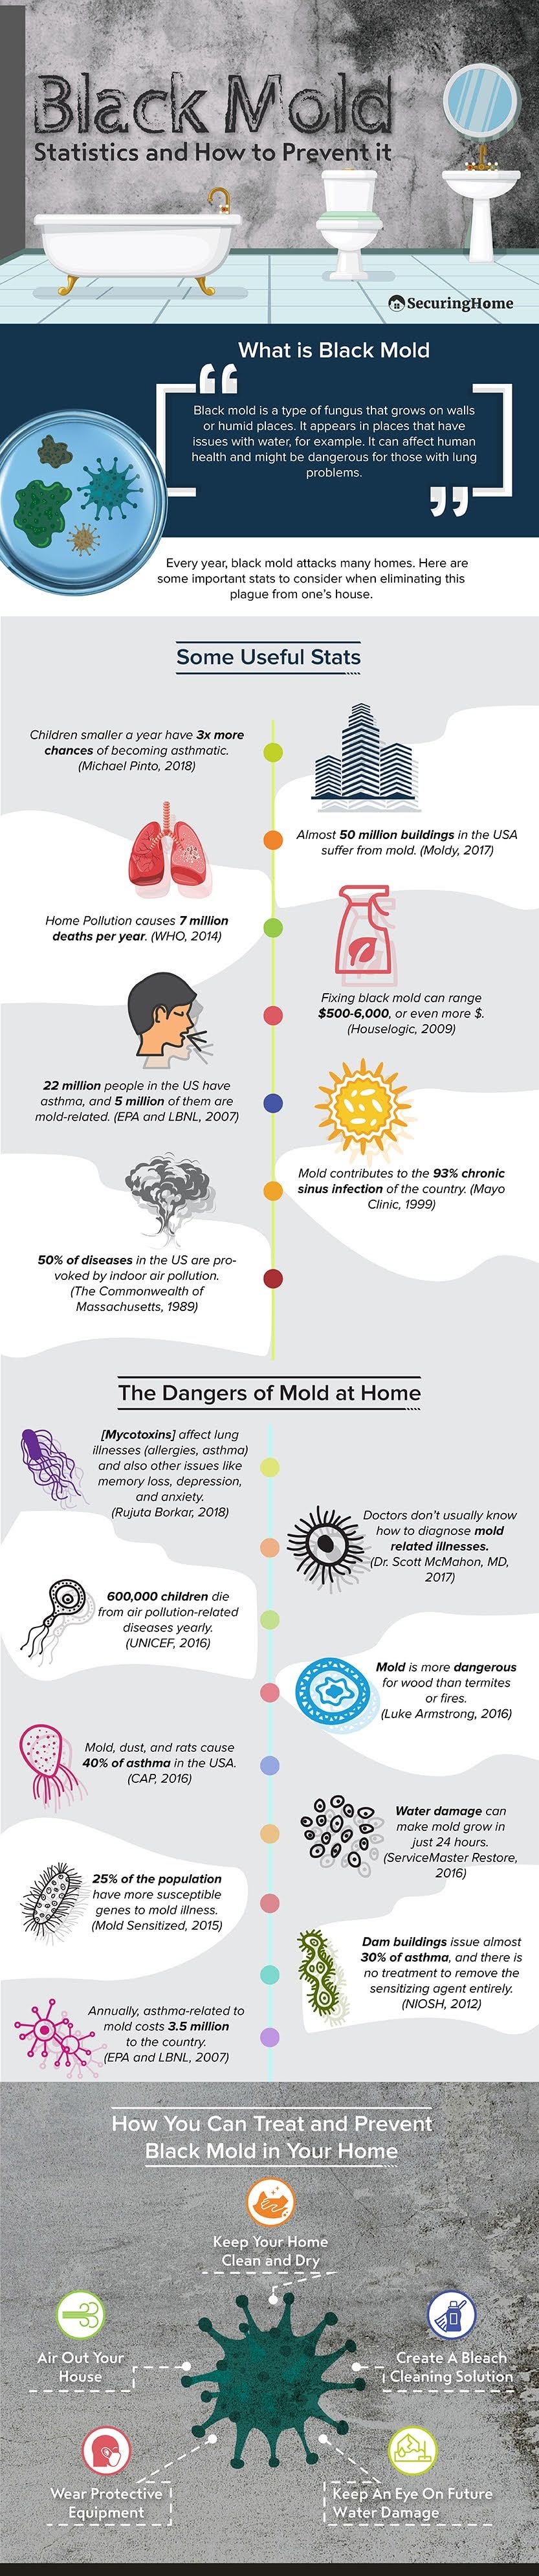 How to Get Rid of Black Mold? infographic